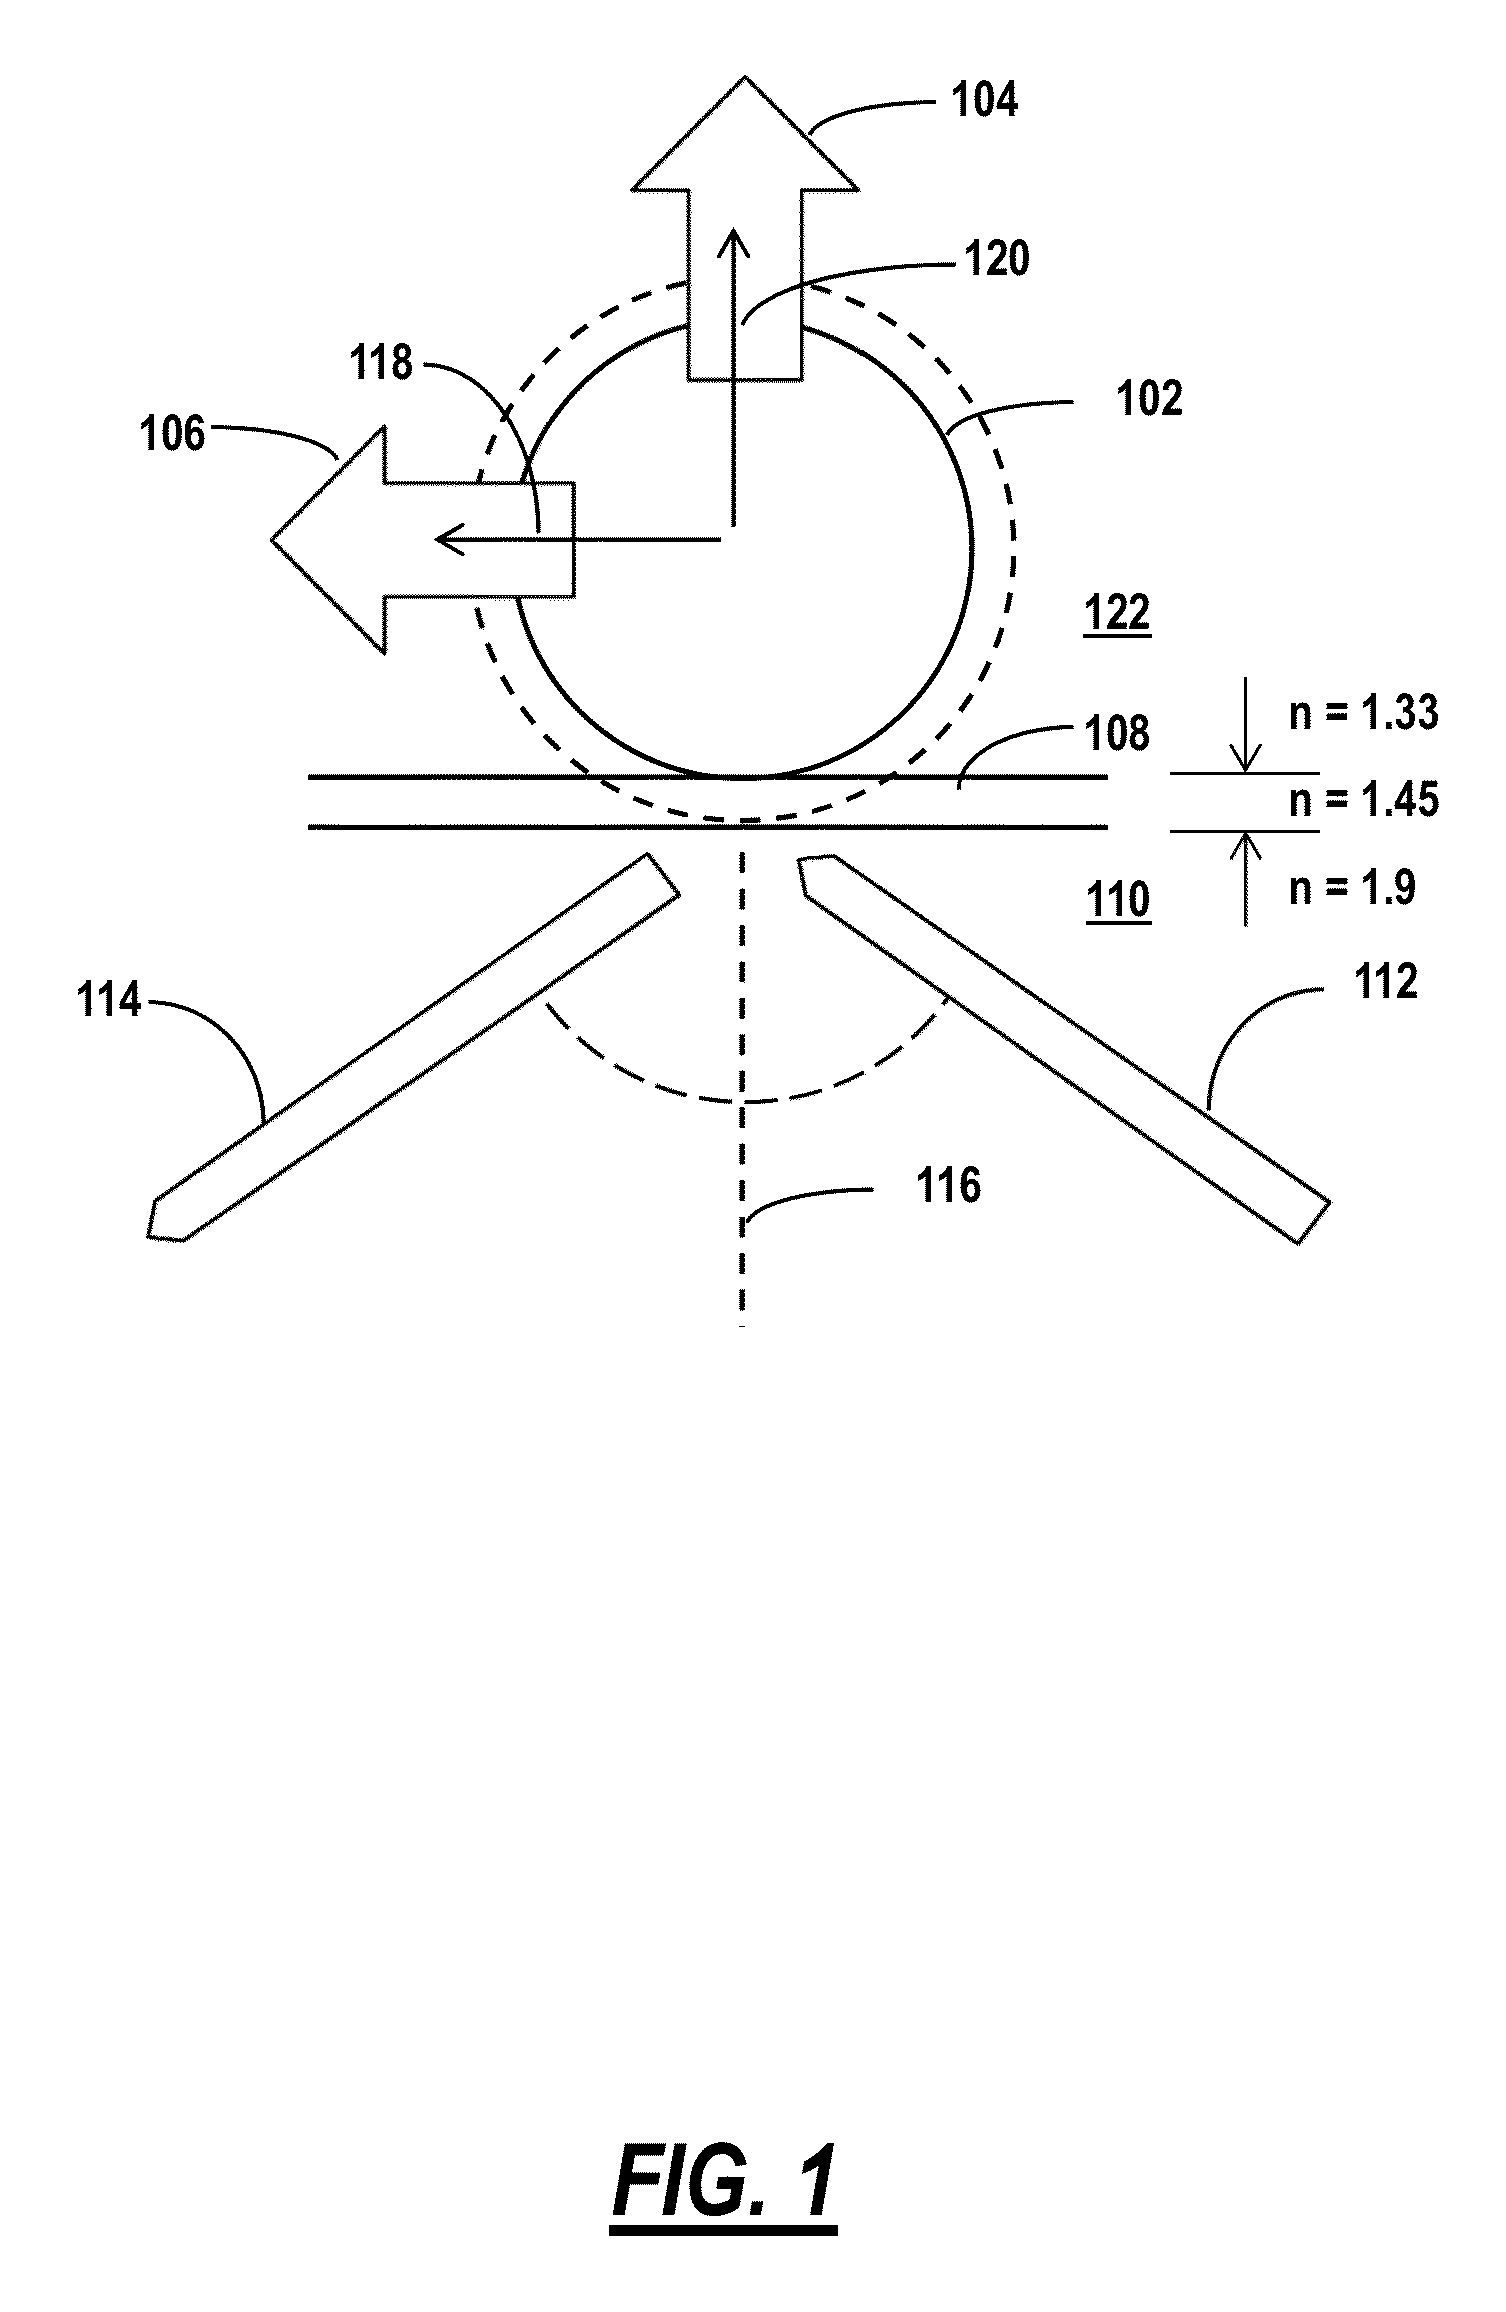 Methods and devices for optical sorting of microspheres based on their resonant optical properties